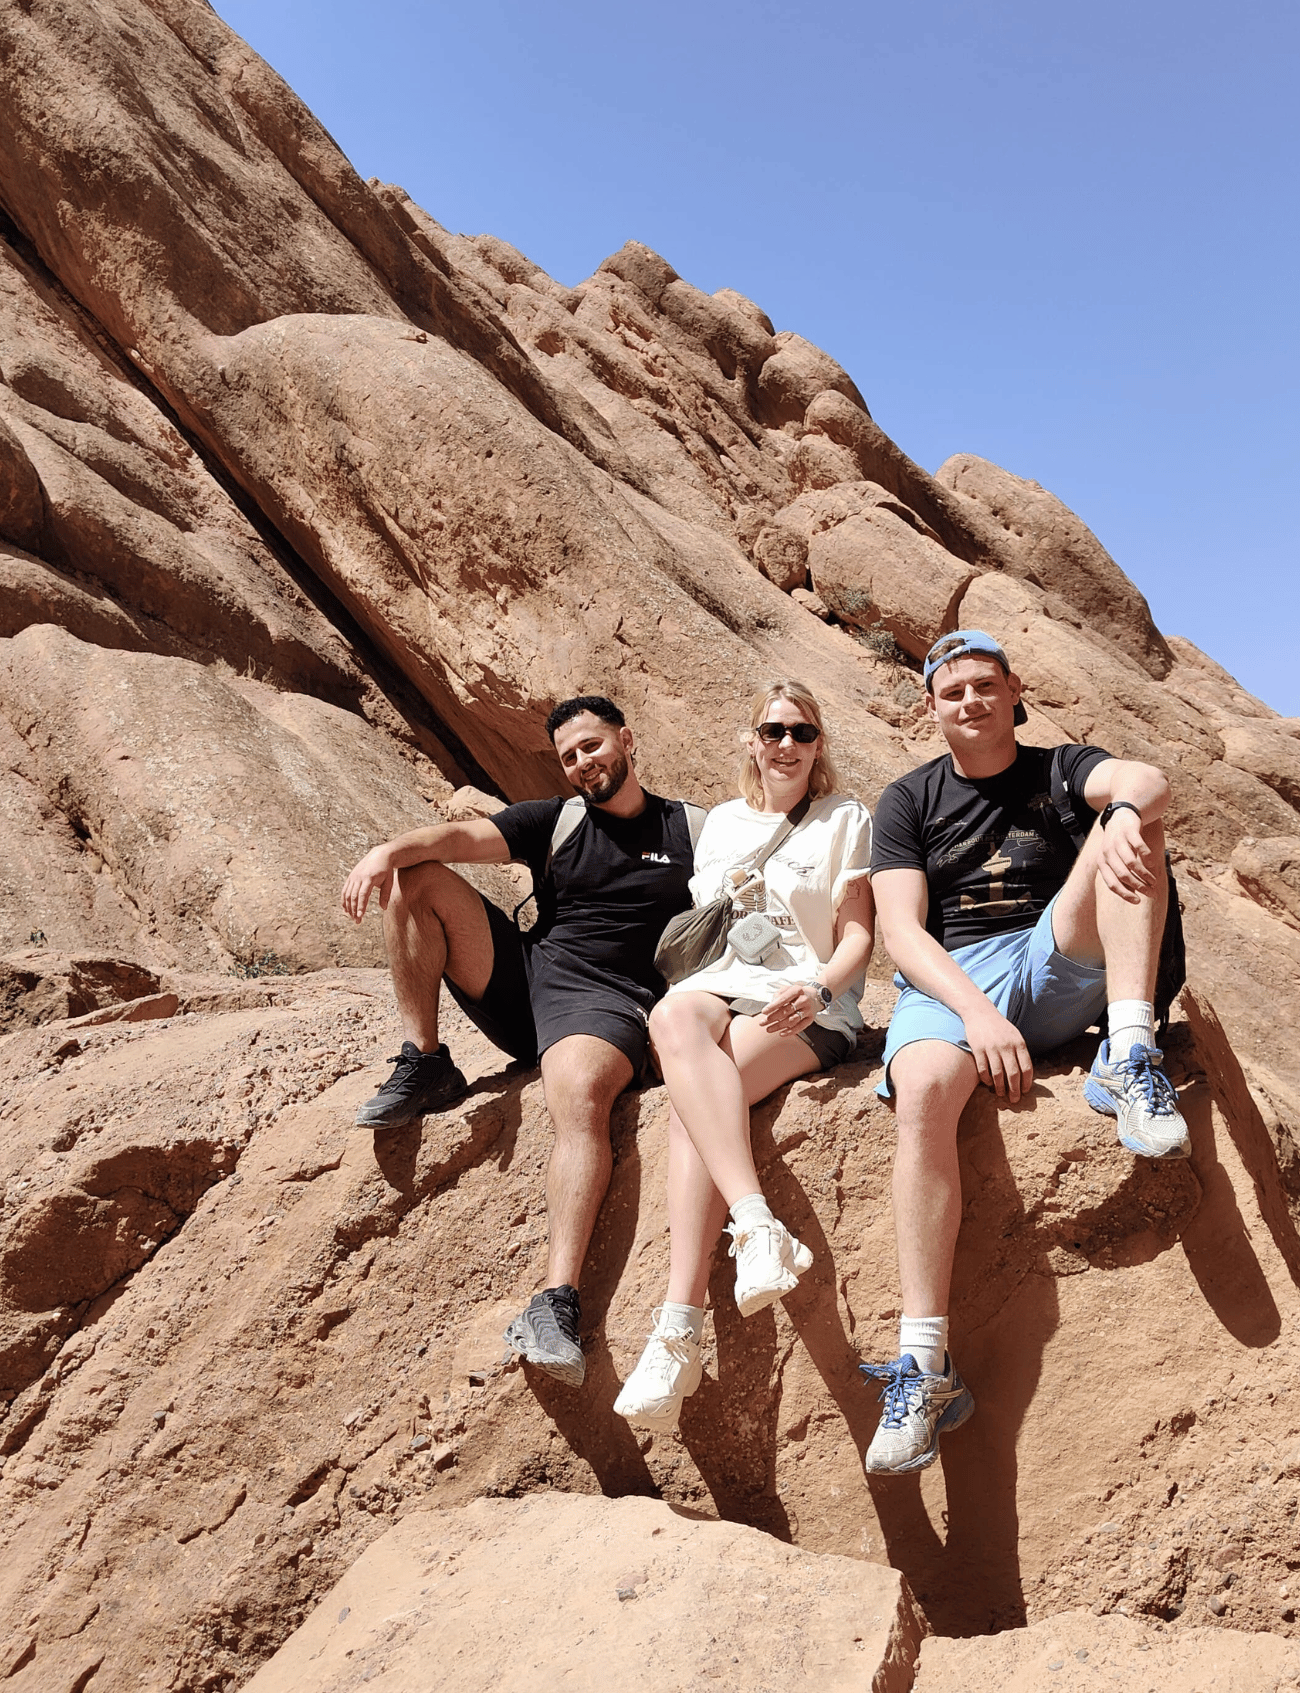 A happy family exploring Morocco during their 8-day trip, experiencing culture and adventure together.